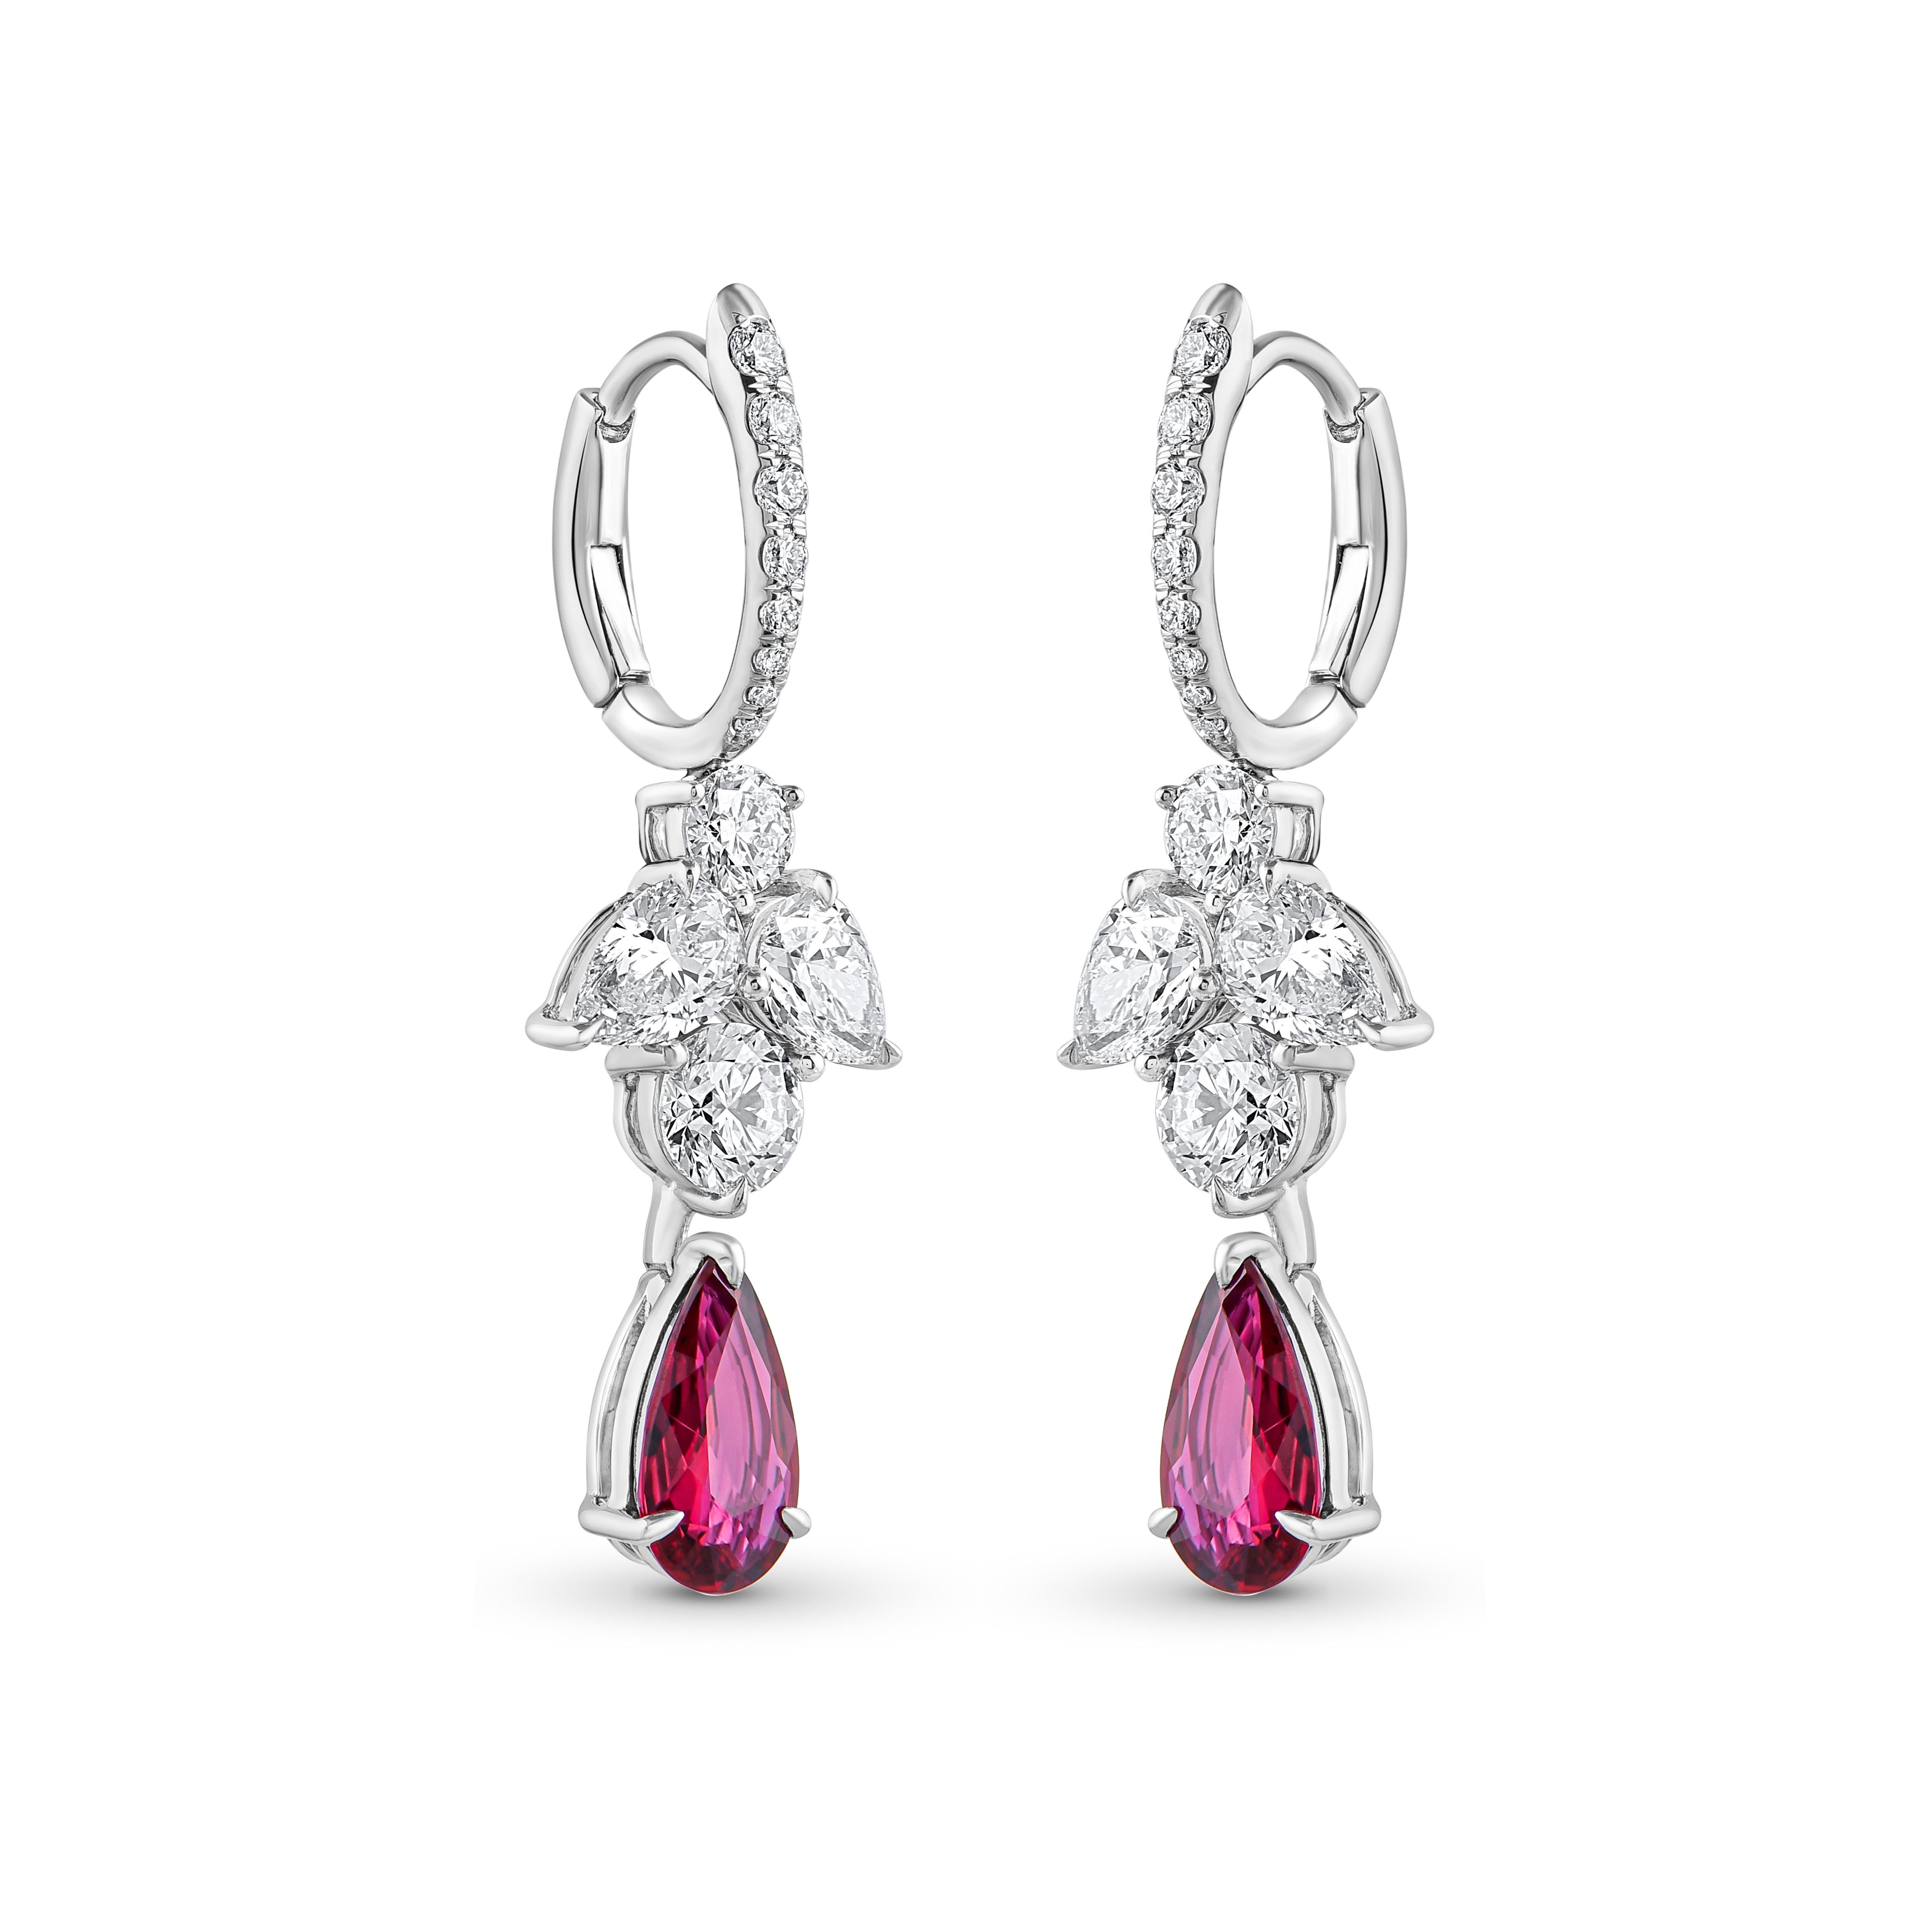 Inspired by the JOY of experiencing a gushing waterfall, these exquisite and elegant dangling earrings from the Cascade Collection are studded with brilliant cut diamonds and ruby dripping delicately.

Beautifully designed, these earrings will